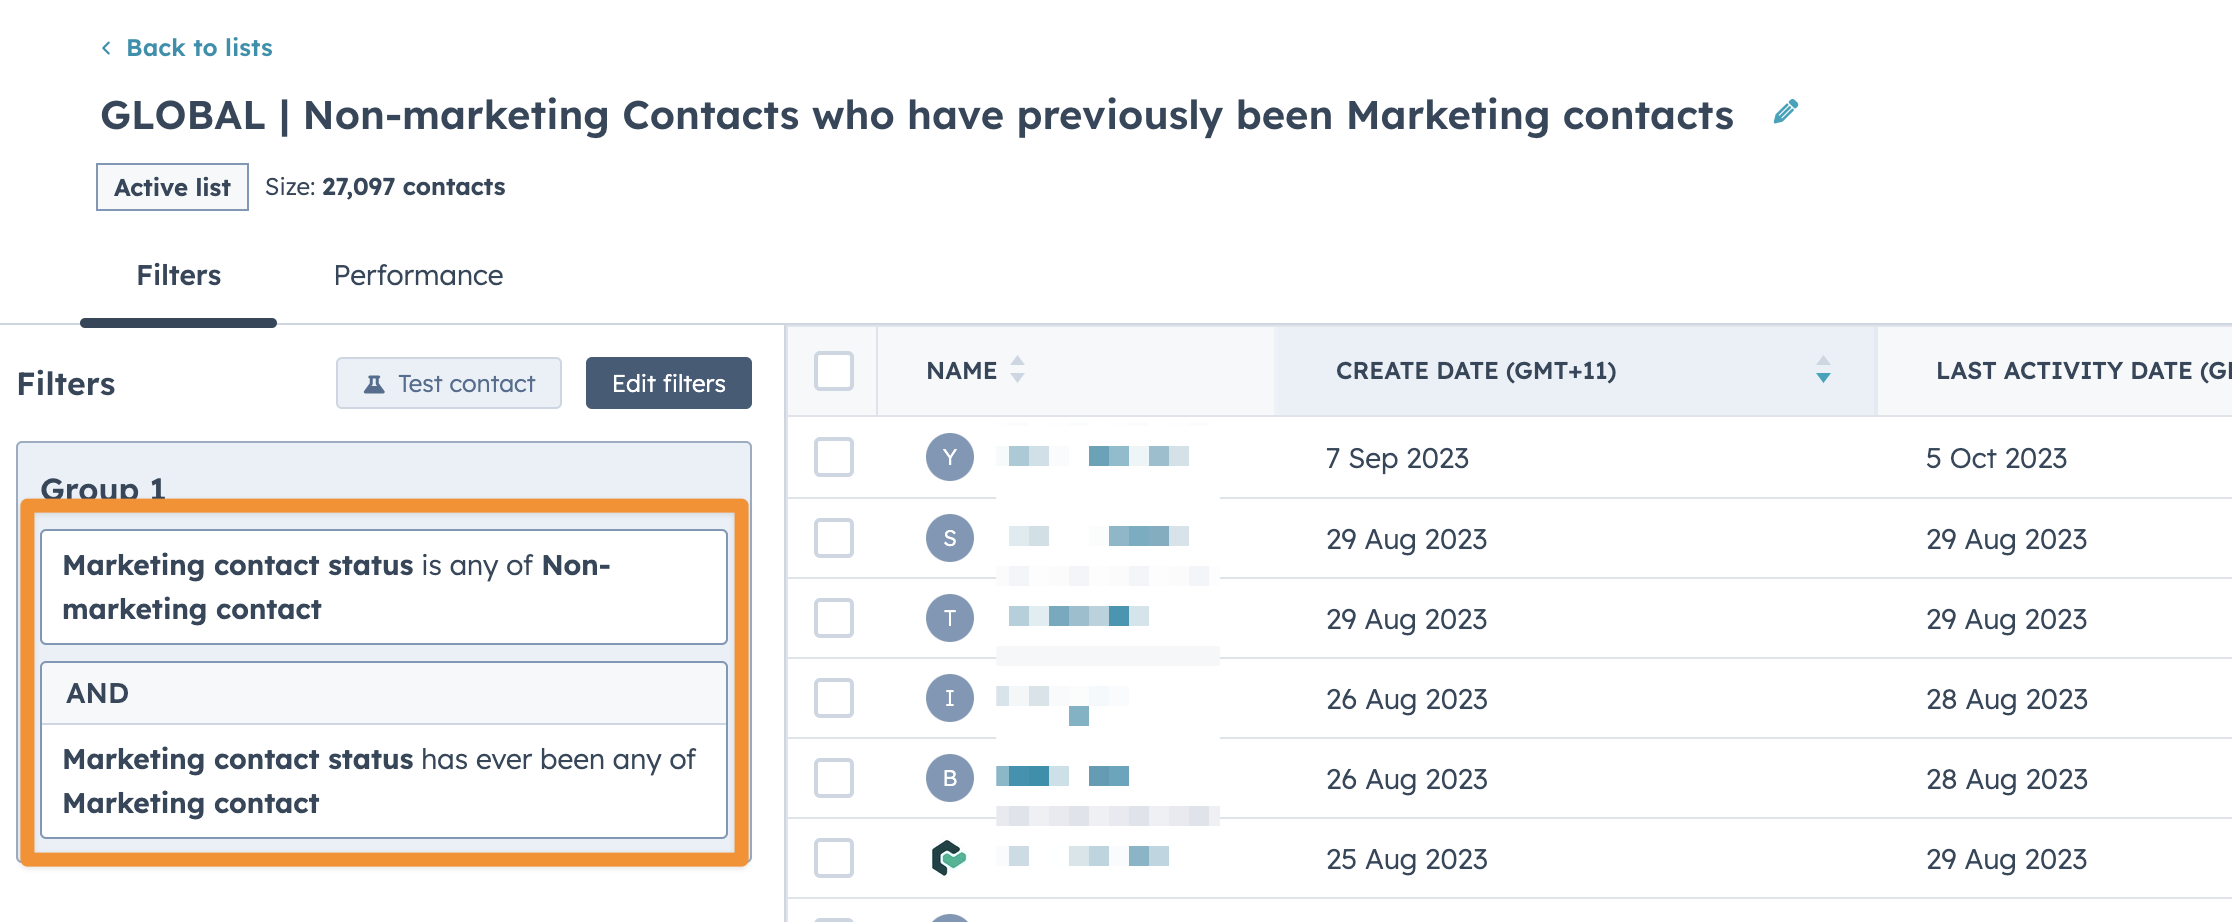 Non-marketing contacts who have previously been Marketing contacts